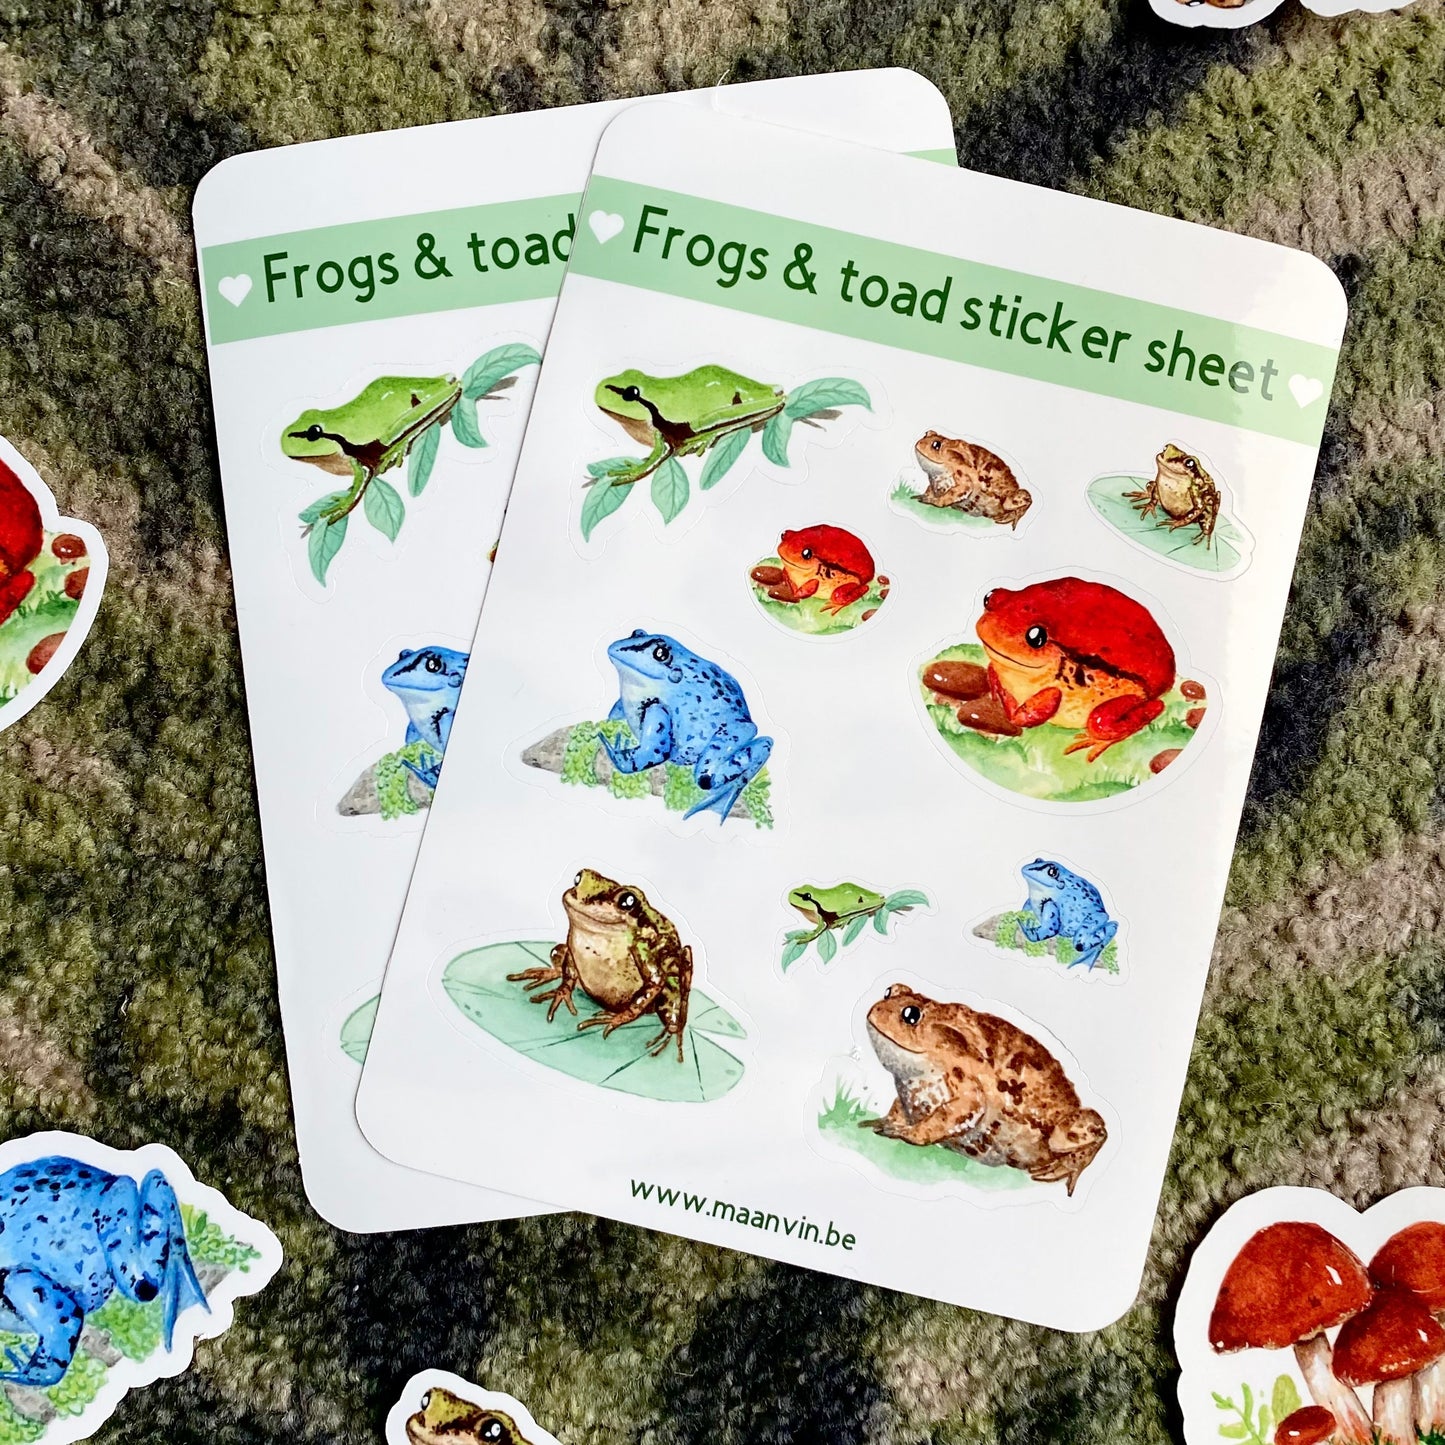 Frogs & toad sticker sheet